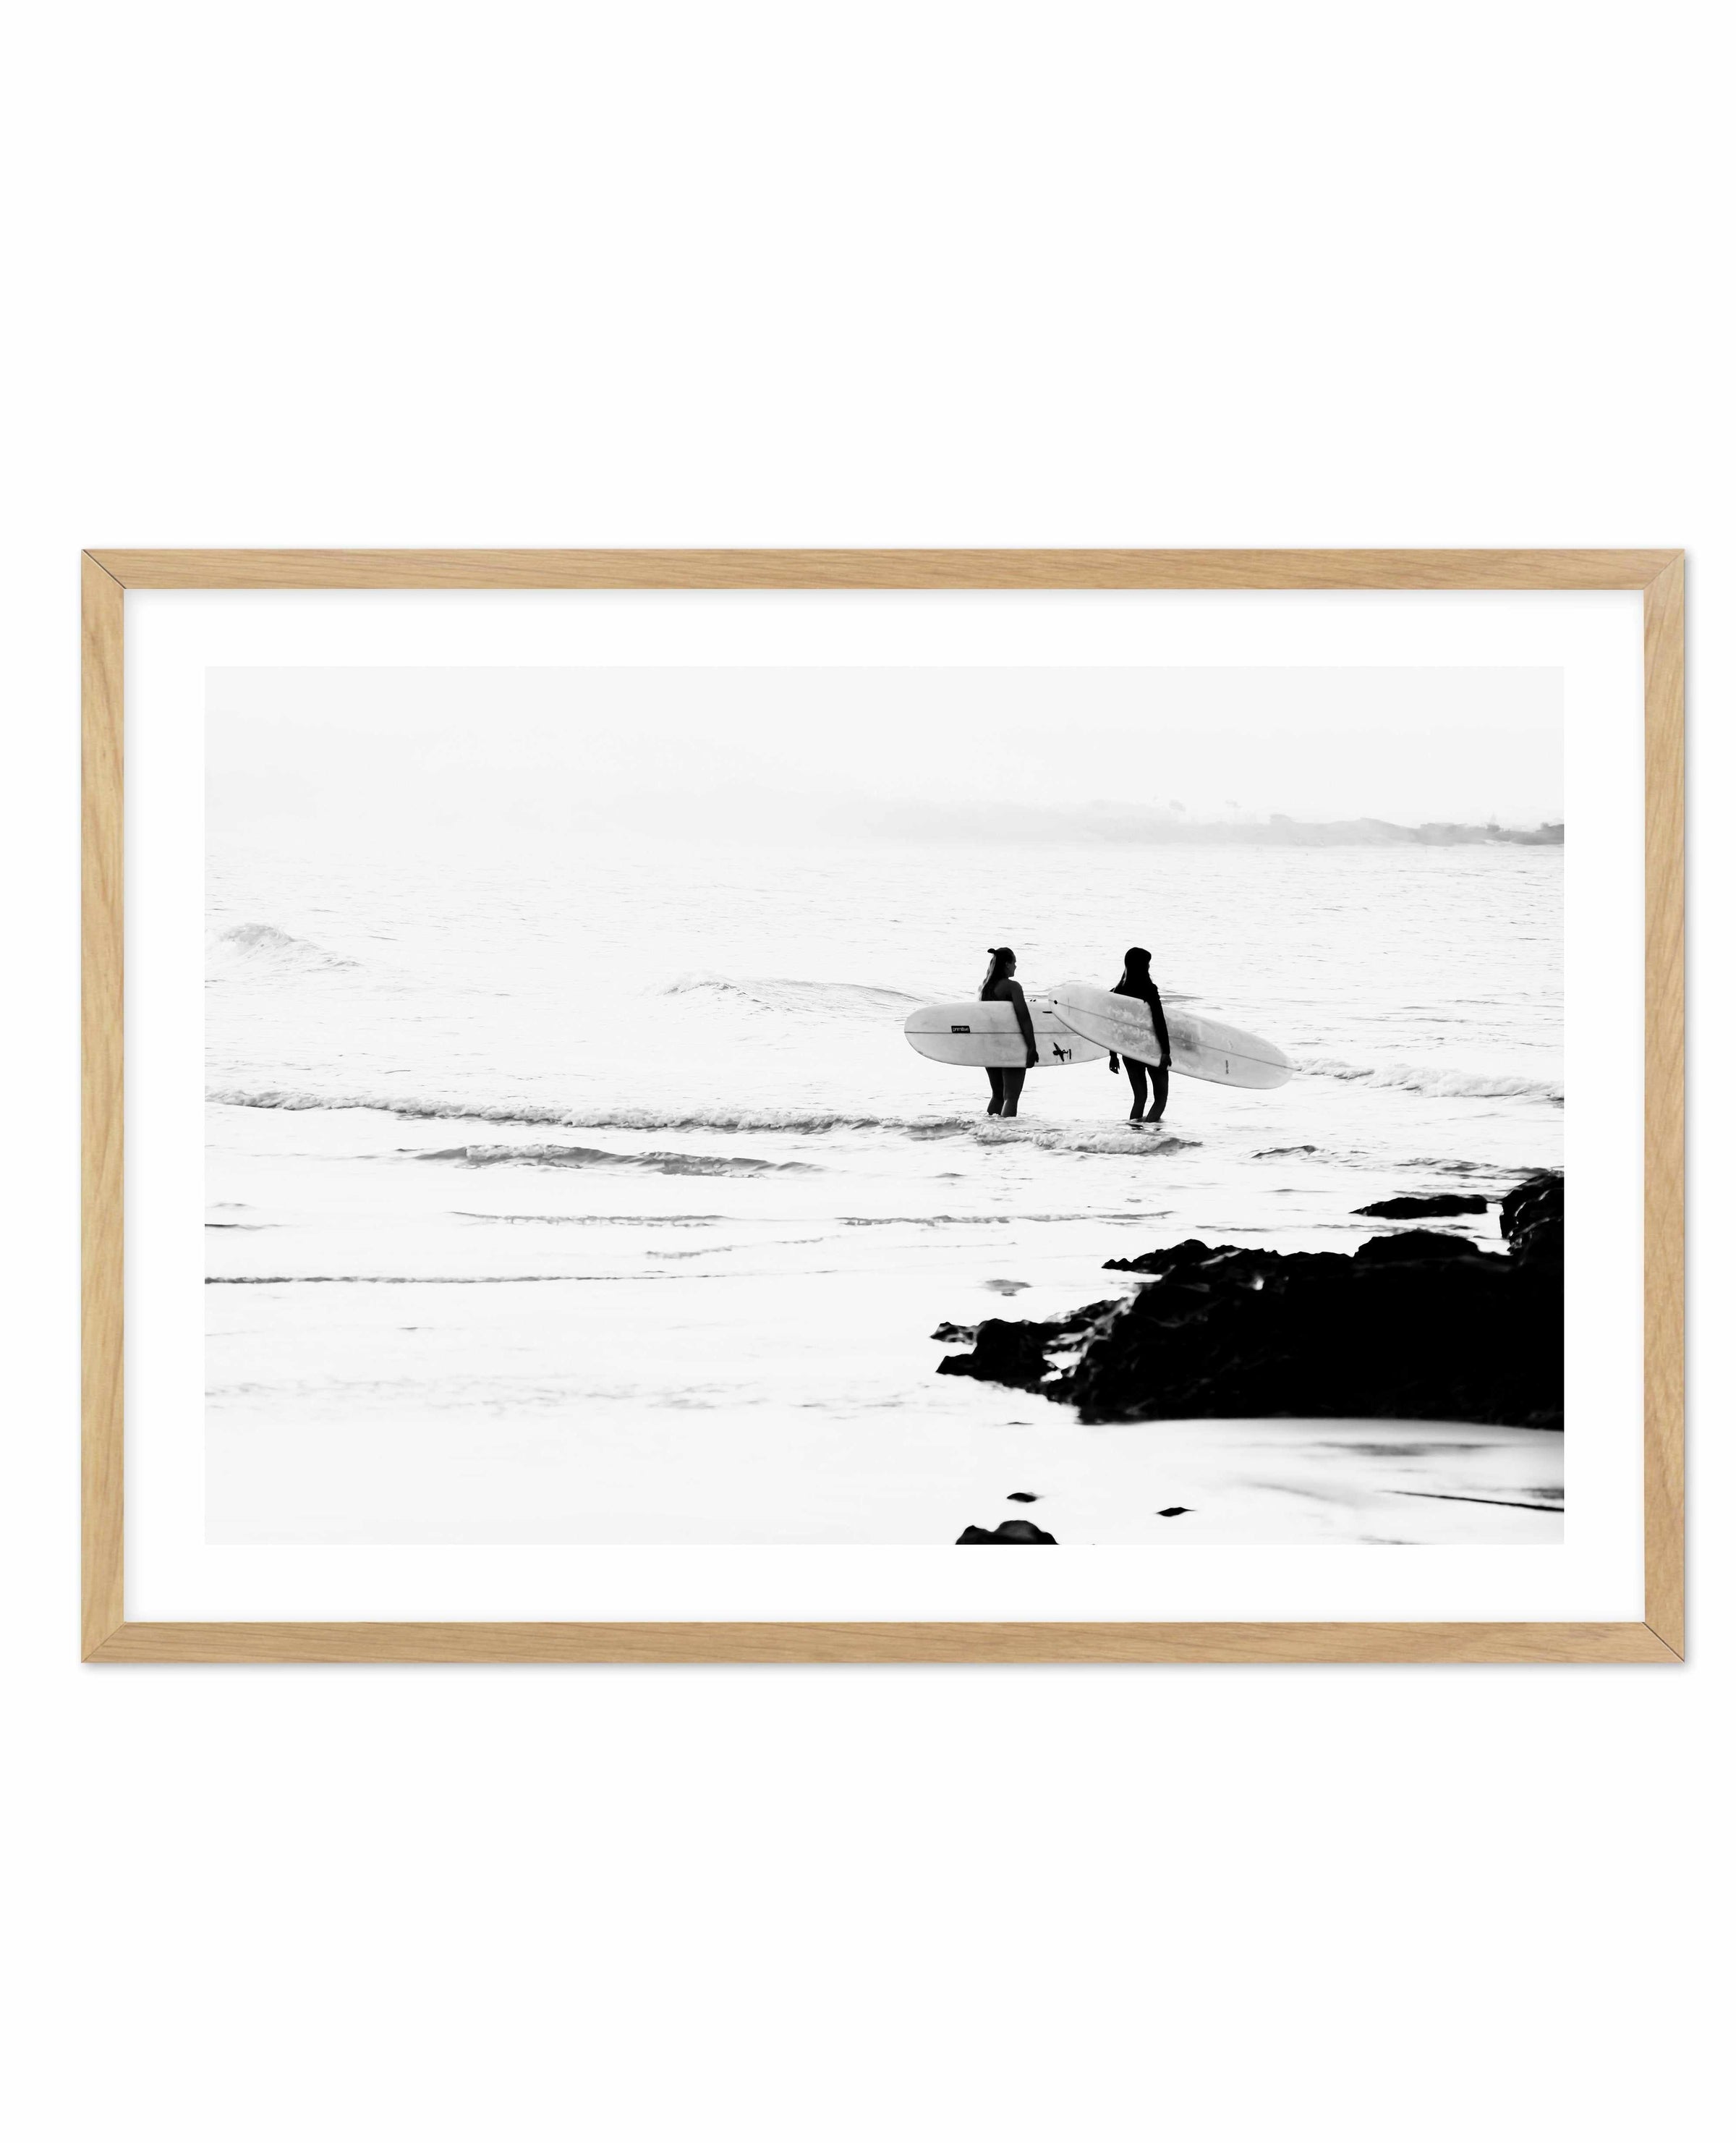 SHOP Byron Bay, The Pass | Surfer Ocean Photographic Art Print or ...